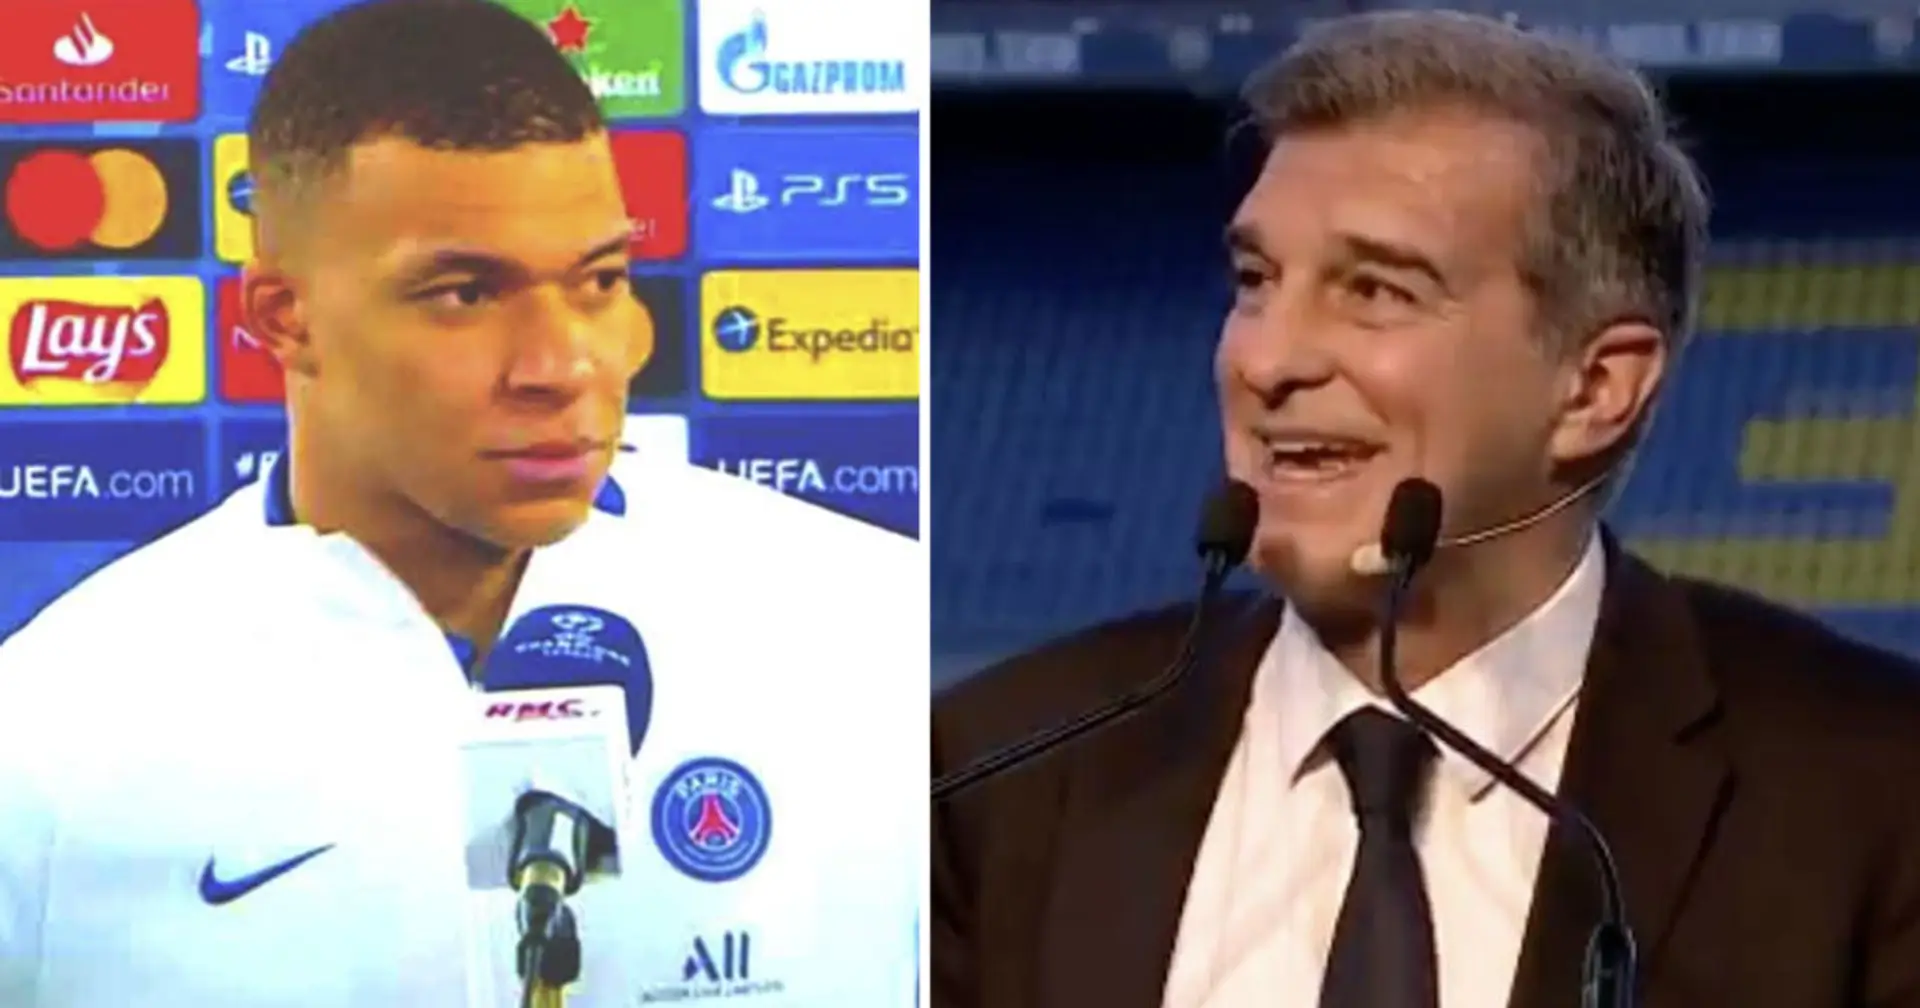 Weirdest rumour of the day: Barca working on signing Mbappe in 2022